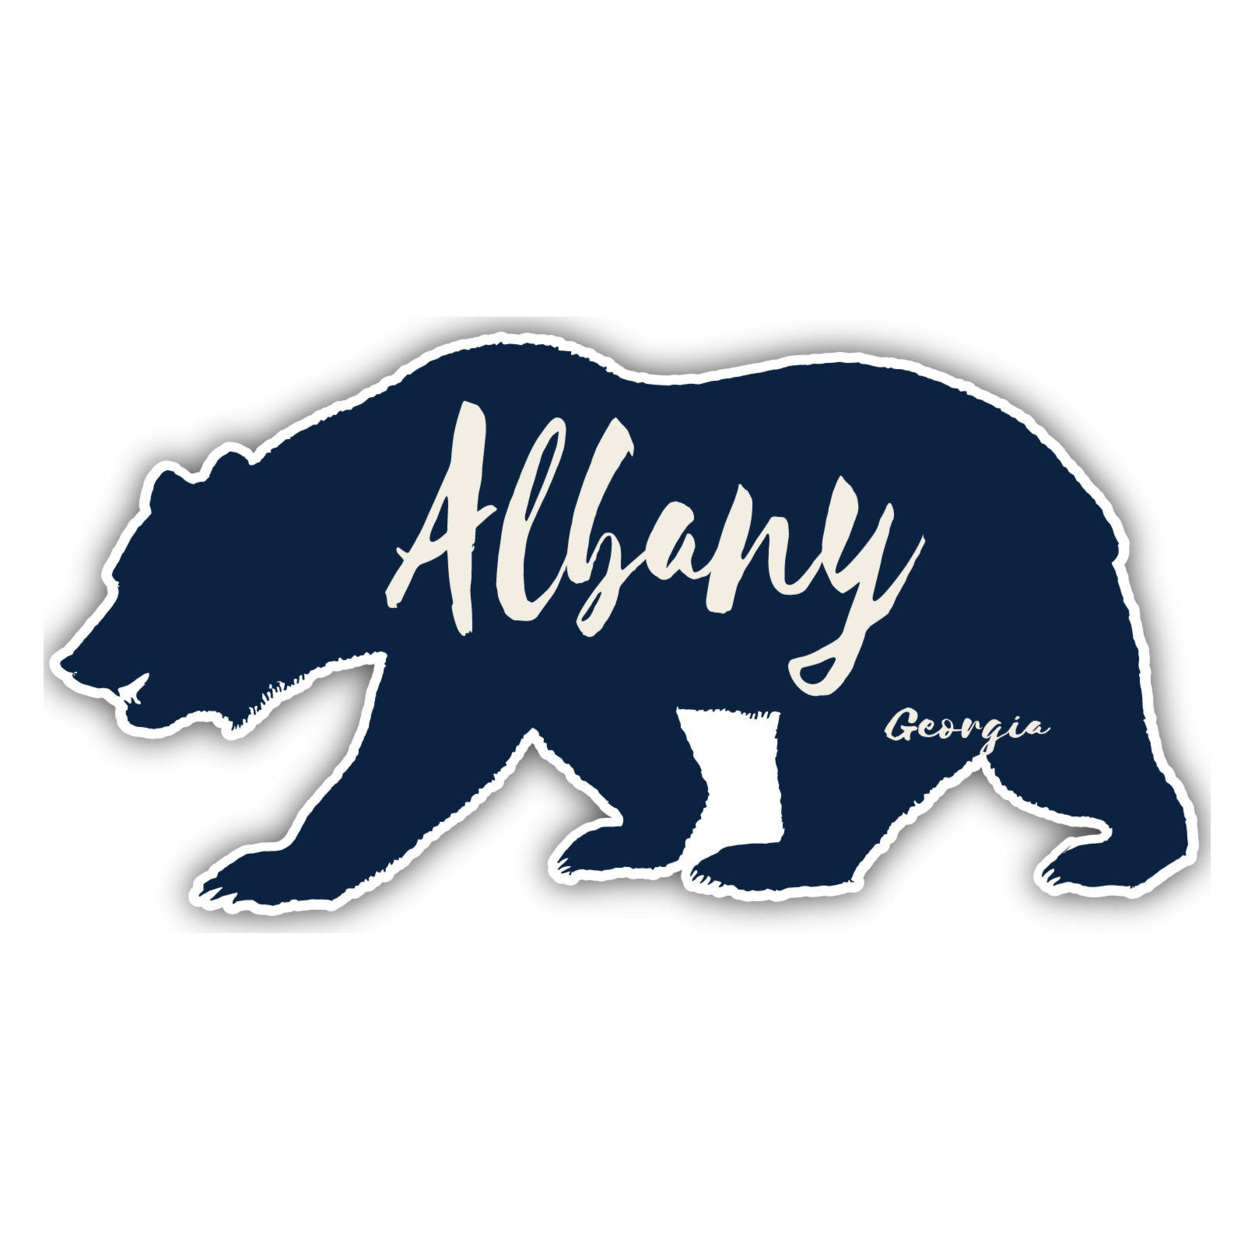 Albany Georgia Souvenir Decorative Stickers (Choose Theme And Size) - 4-Pack, 6-Inch, Tent